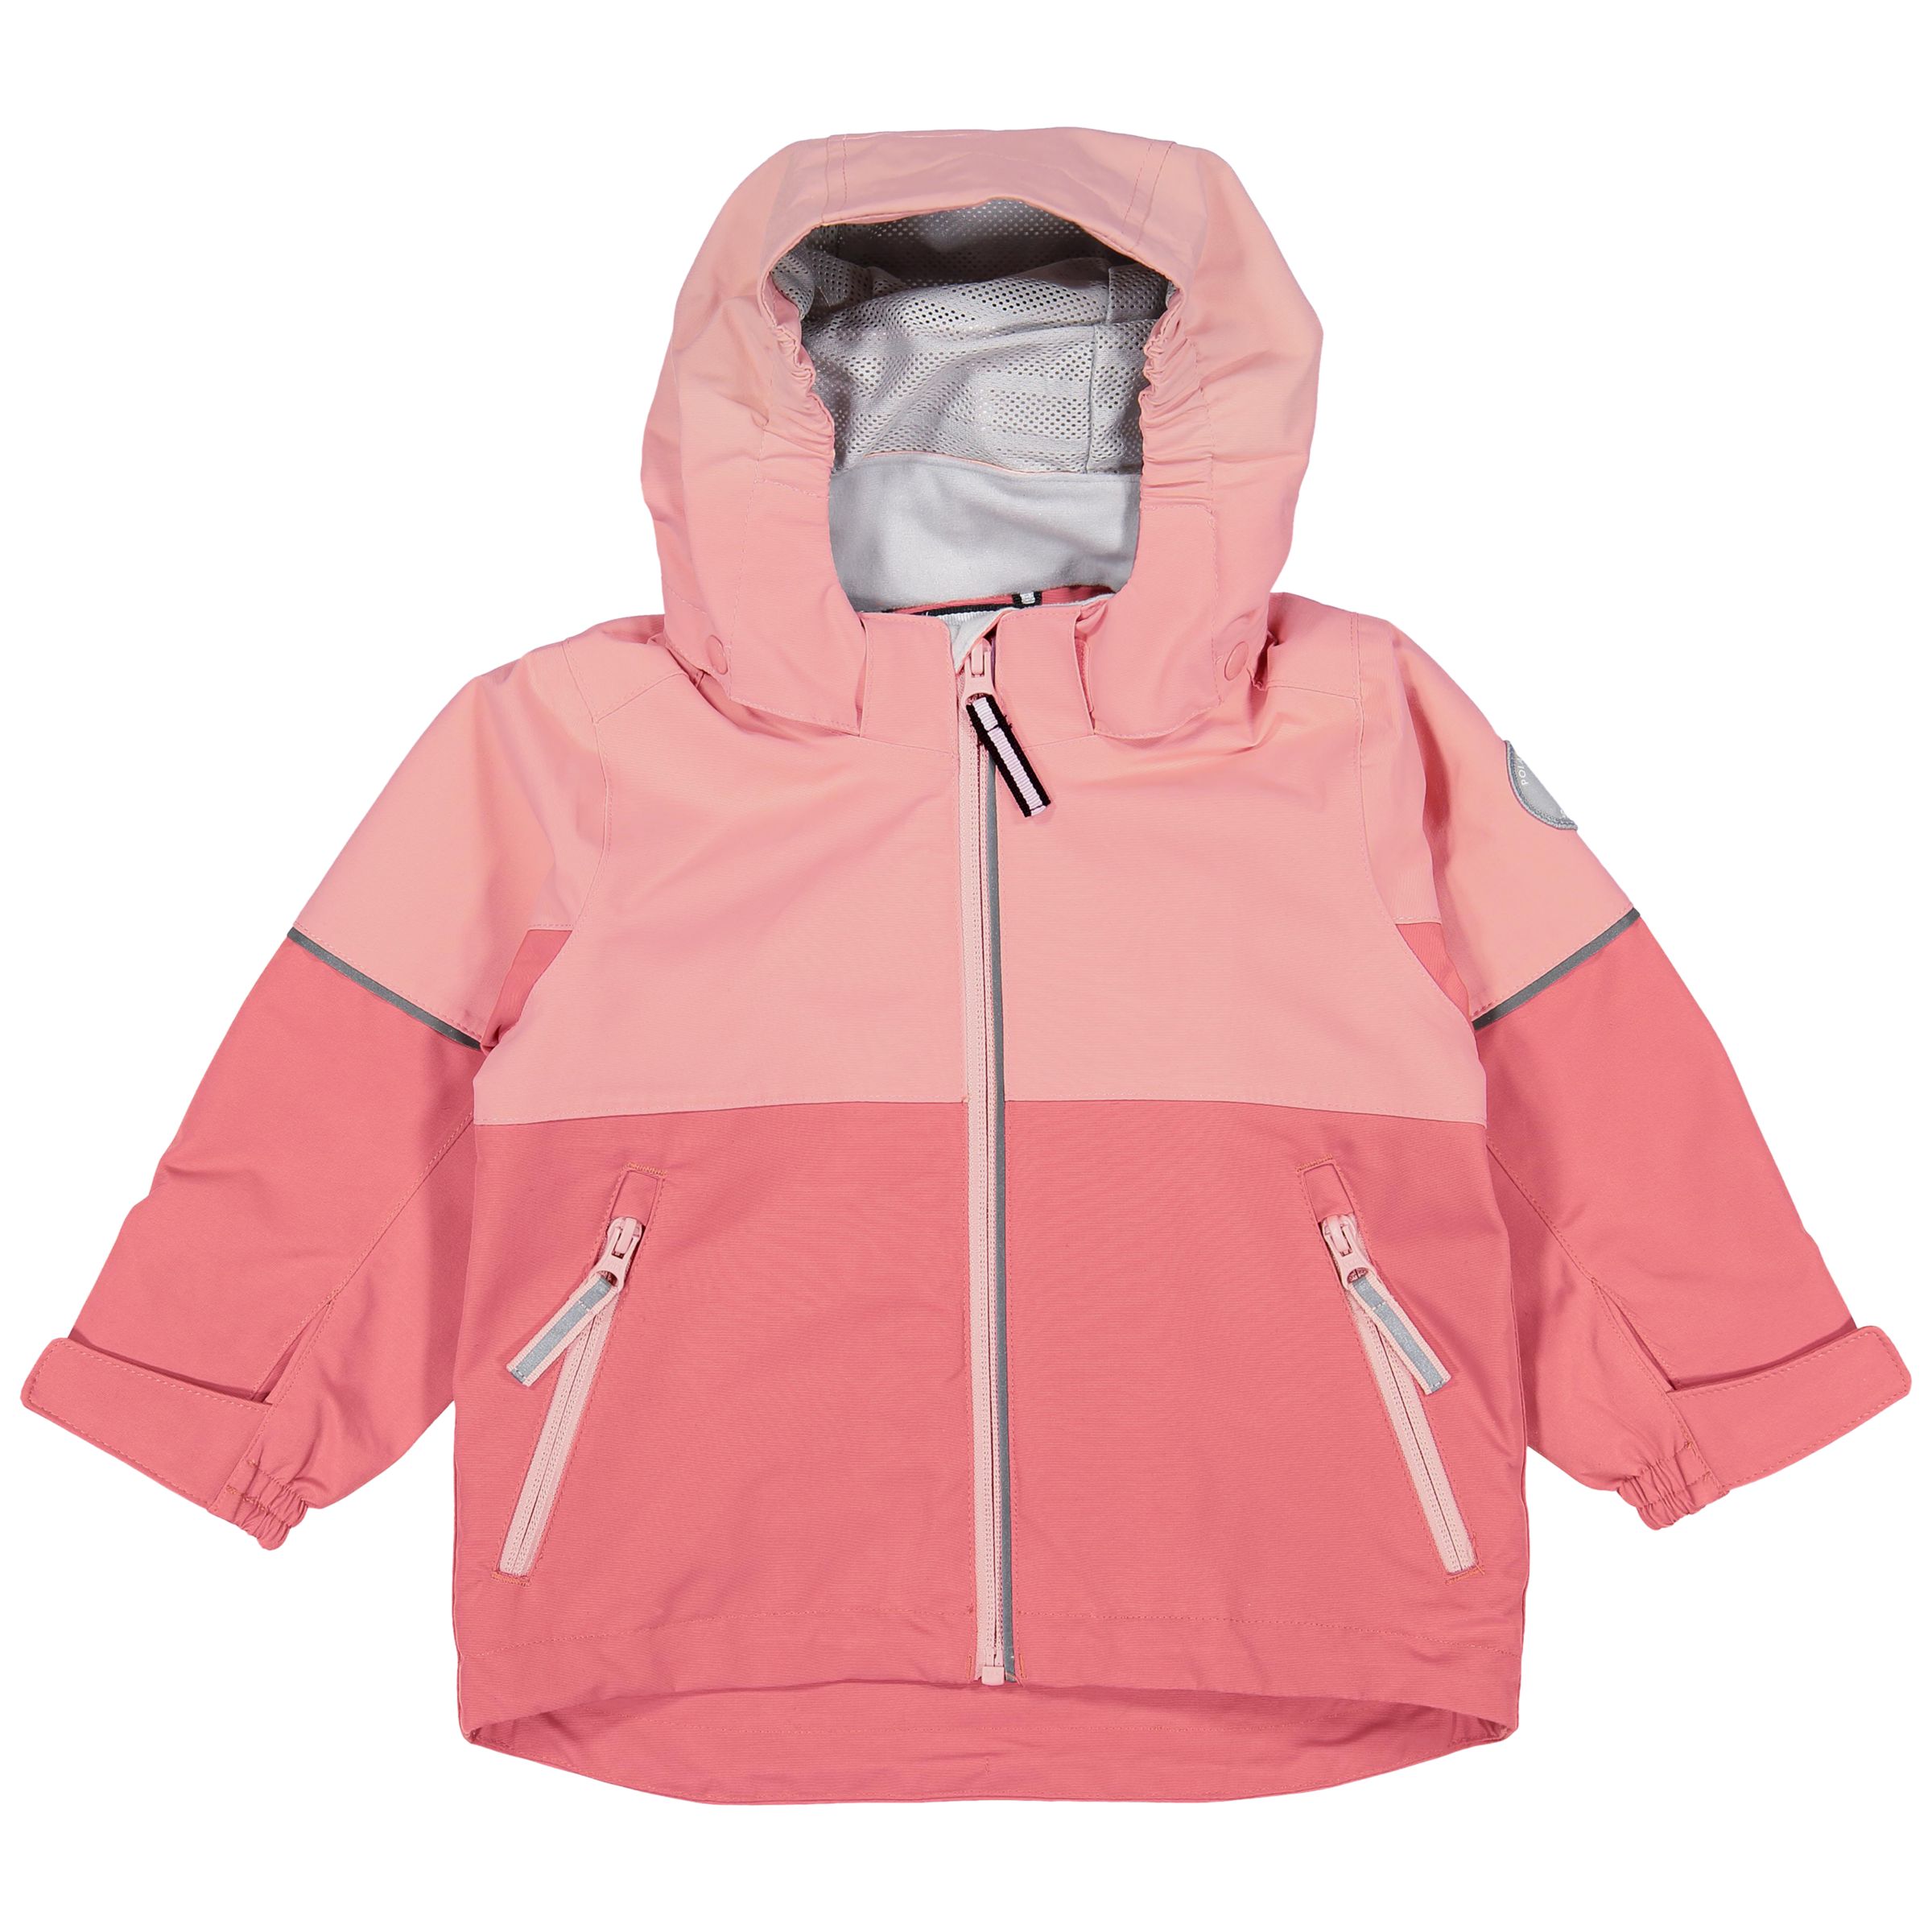 Polarn O. Pyret Baby Waterproof Shell Coat, Faded Rose